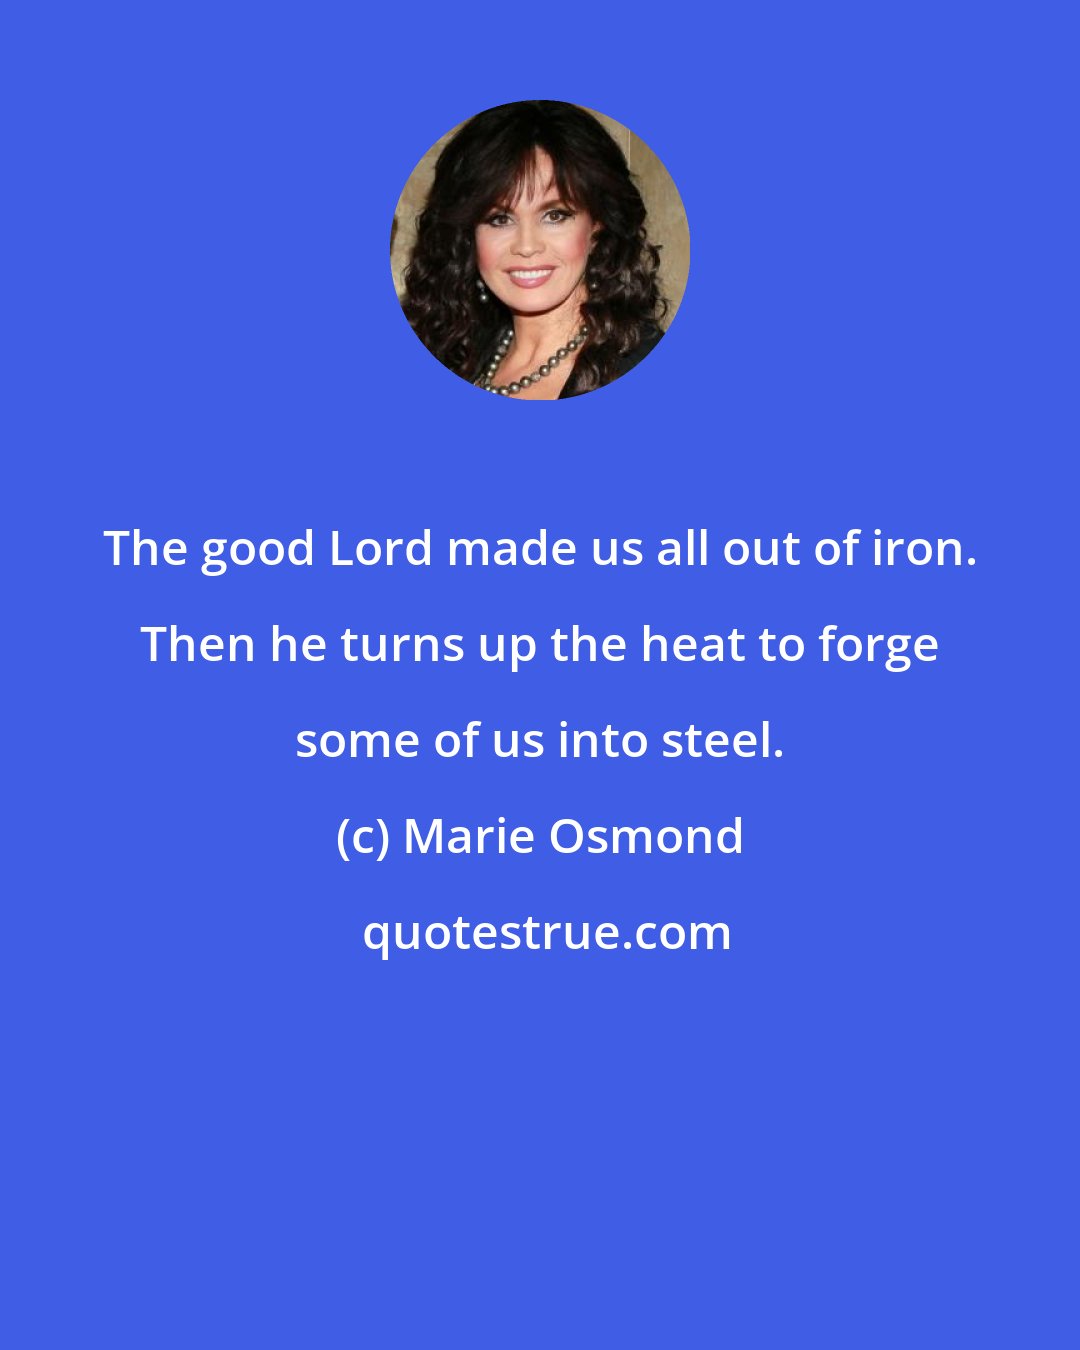 Marie Osmond: The good Lord made us all out of iron. Then he turns up the heat to forge some of us into steel.